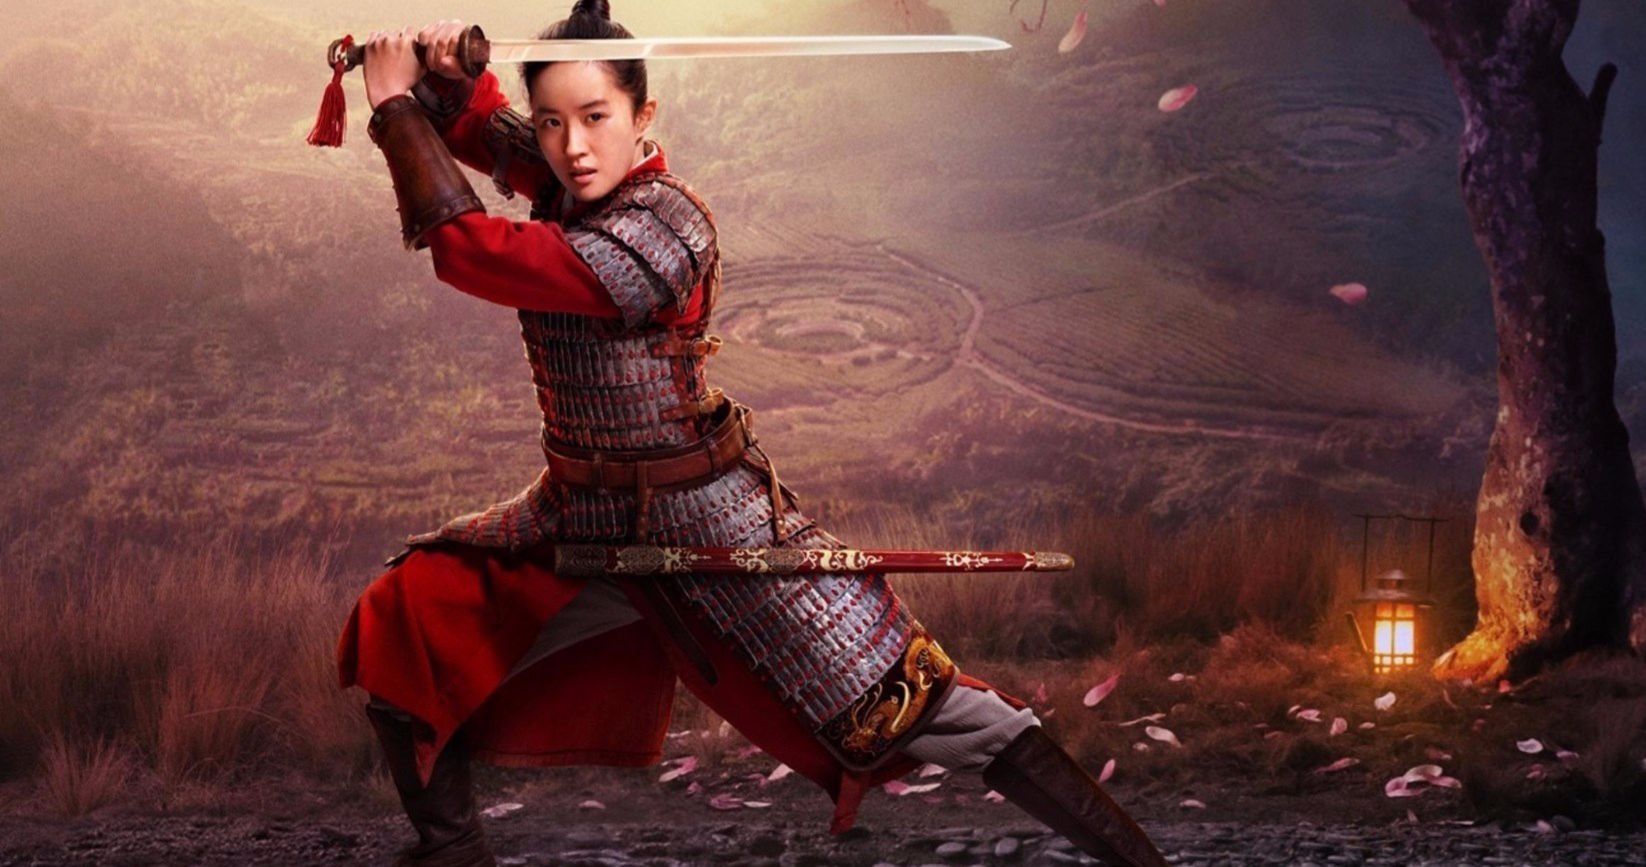 Finding Mulan Featurette Follows the Search for Disney's New Warrior Princess